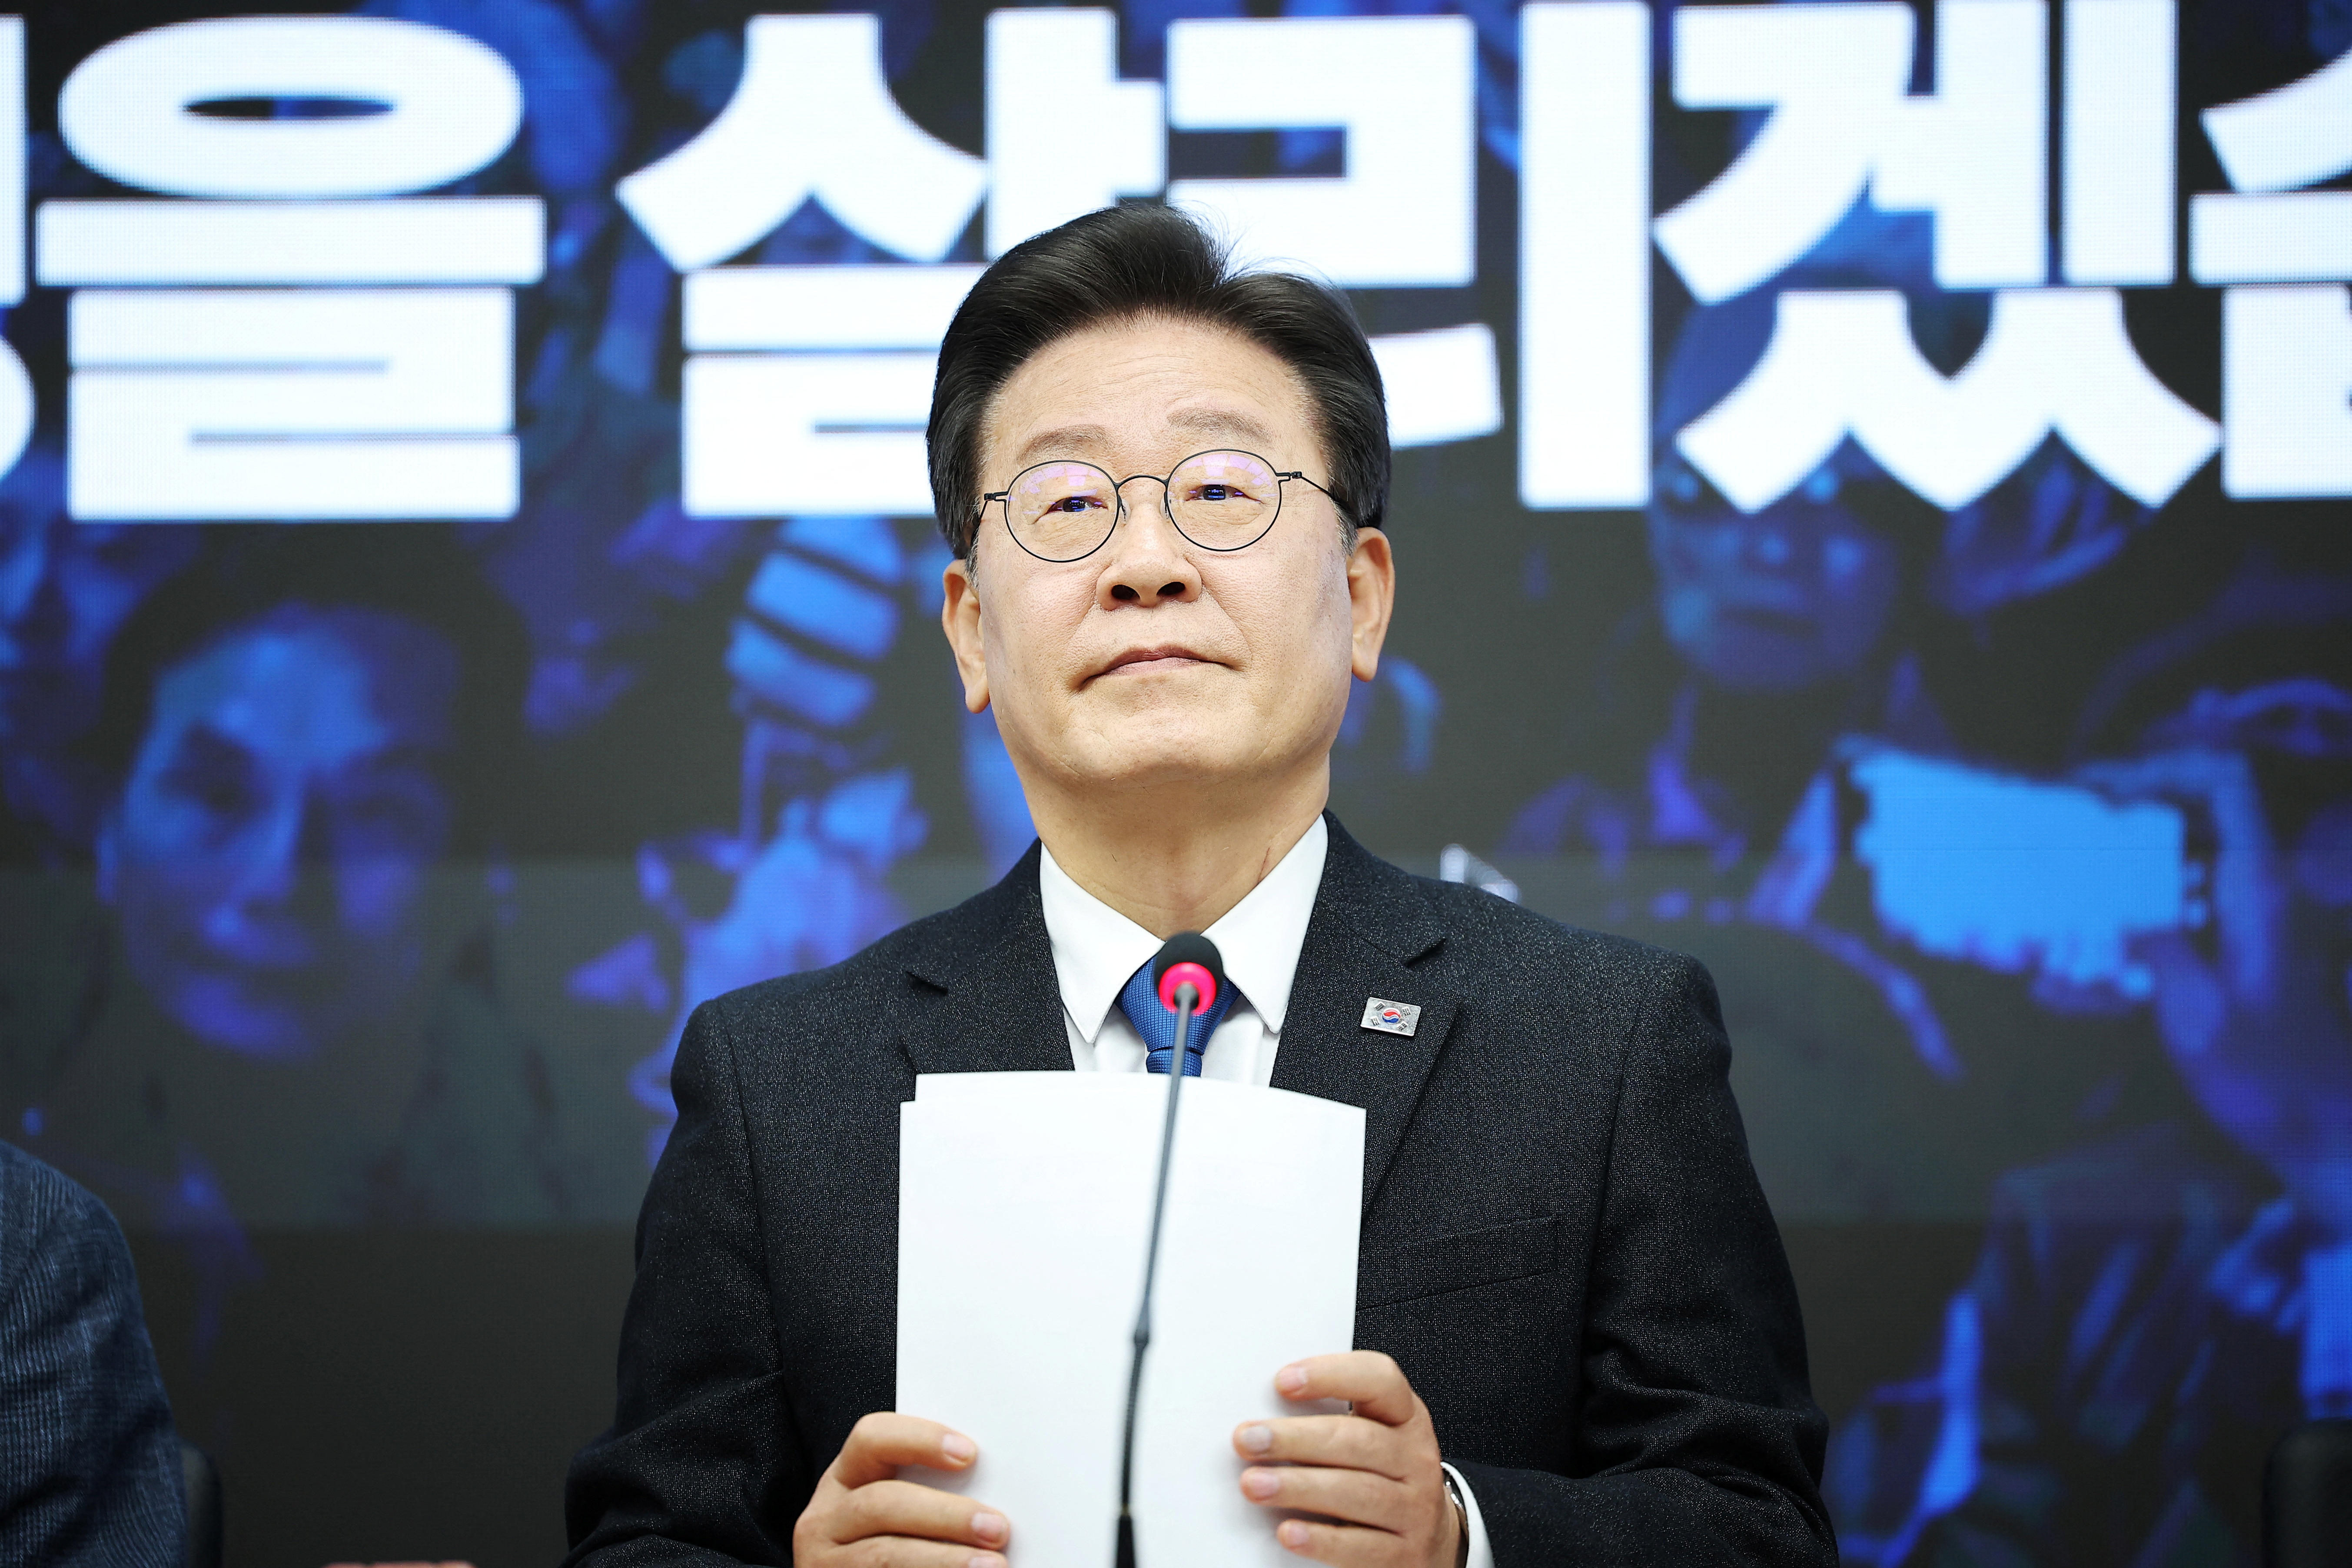 Lee Jae-myung, leader of the main opposition Democratic Party, attends an event to disband the election camp for the 22nd parliamentary election in Seoul